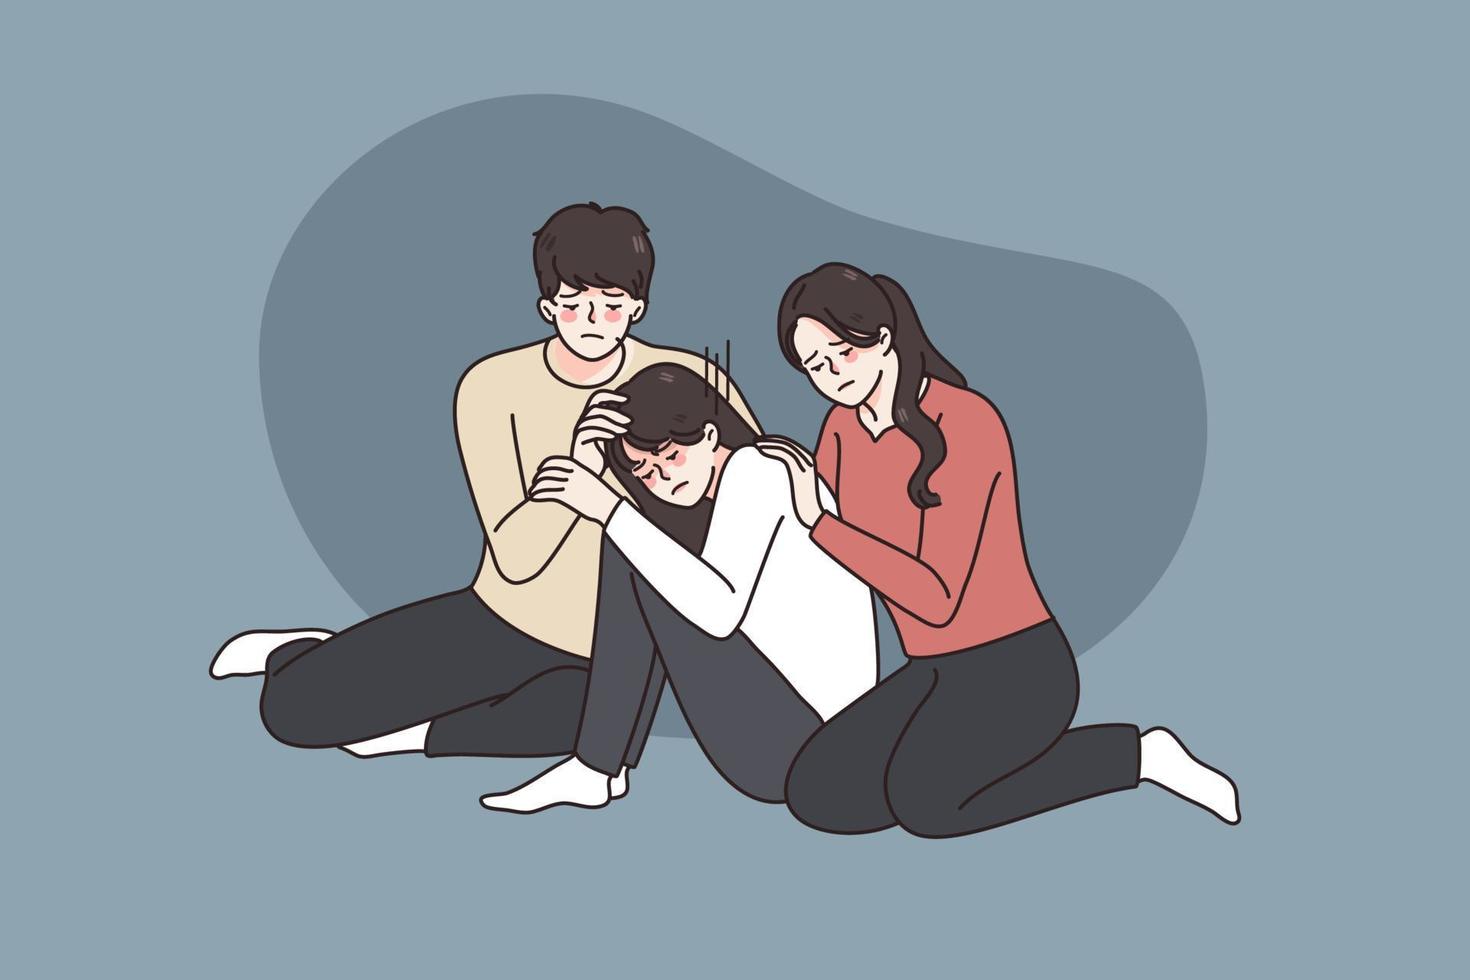 Caring young family hug support upset small teen daughter feeling upset depressed of school bullying. Supportive loving parents cuddle comfort unhappy stressed teenager child. Vector illustration.